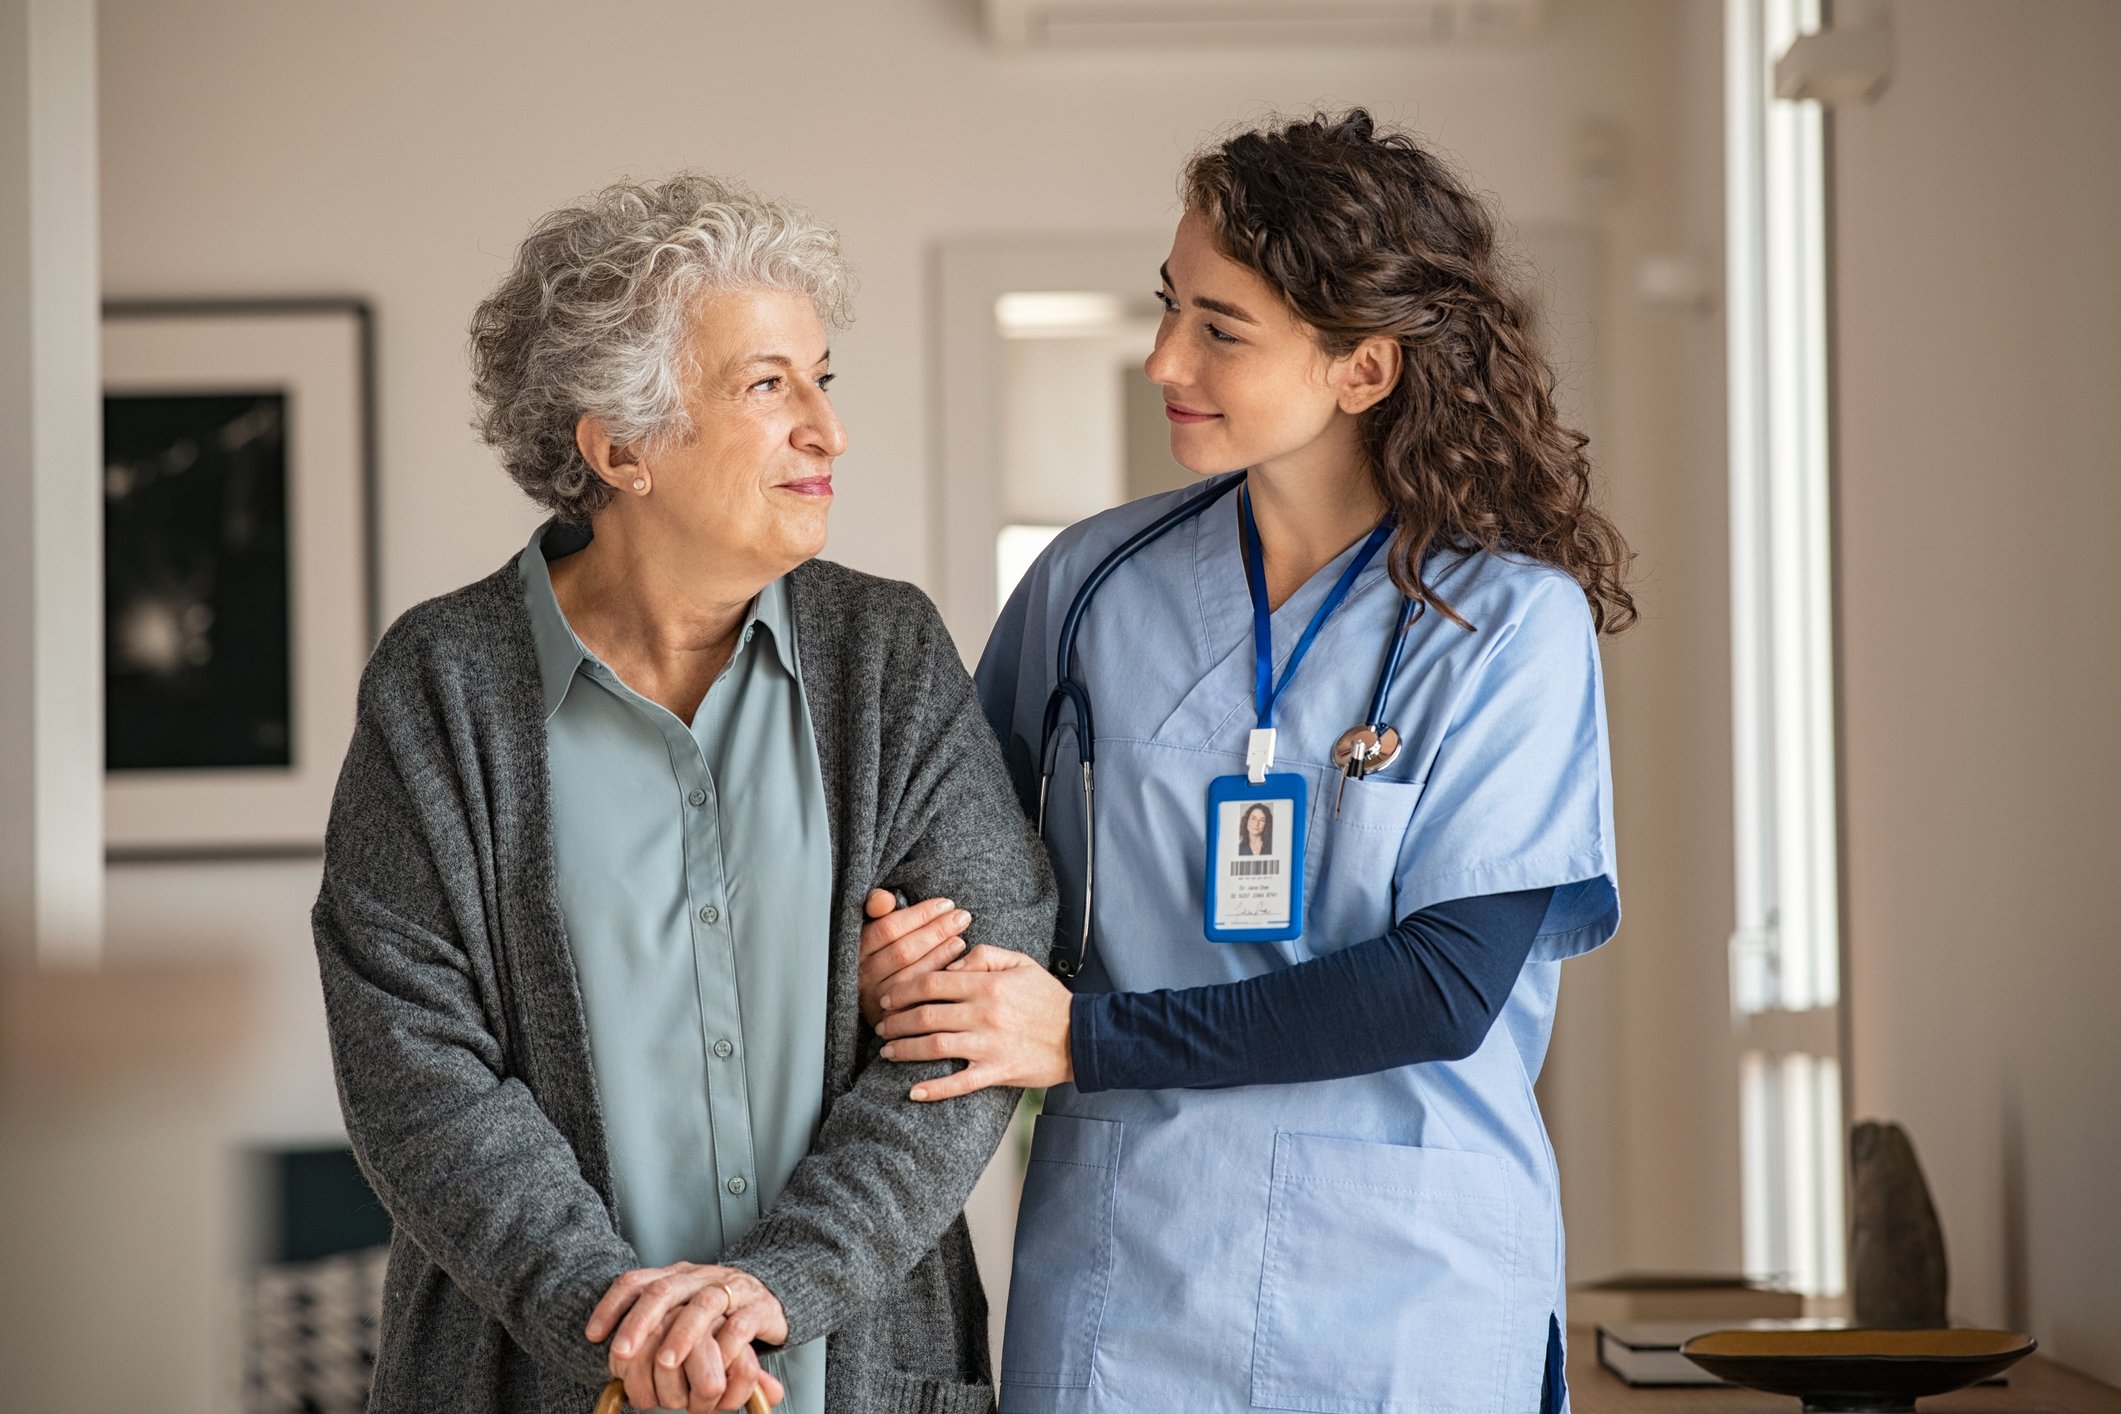 Nurse walking and talking with a patient